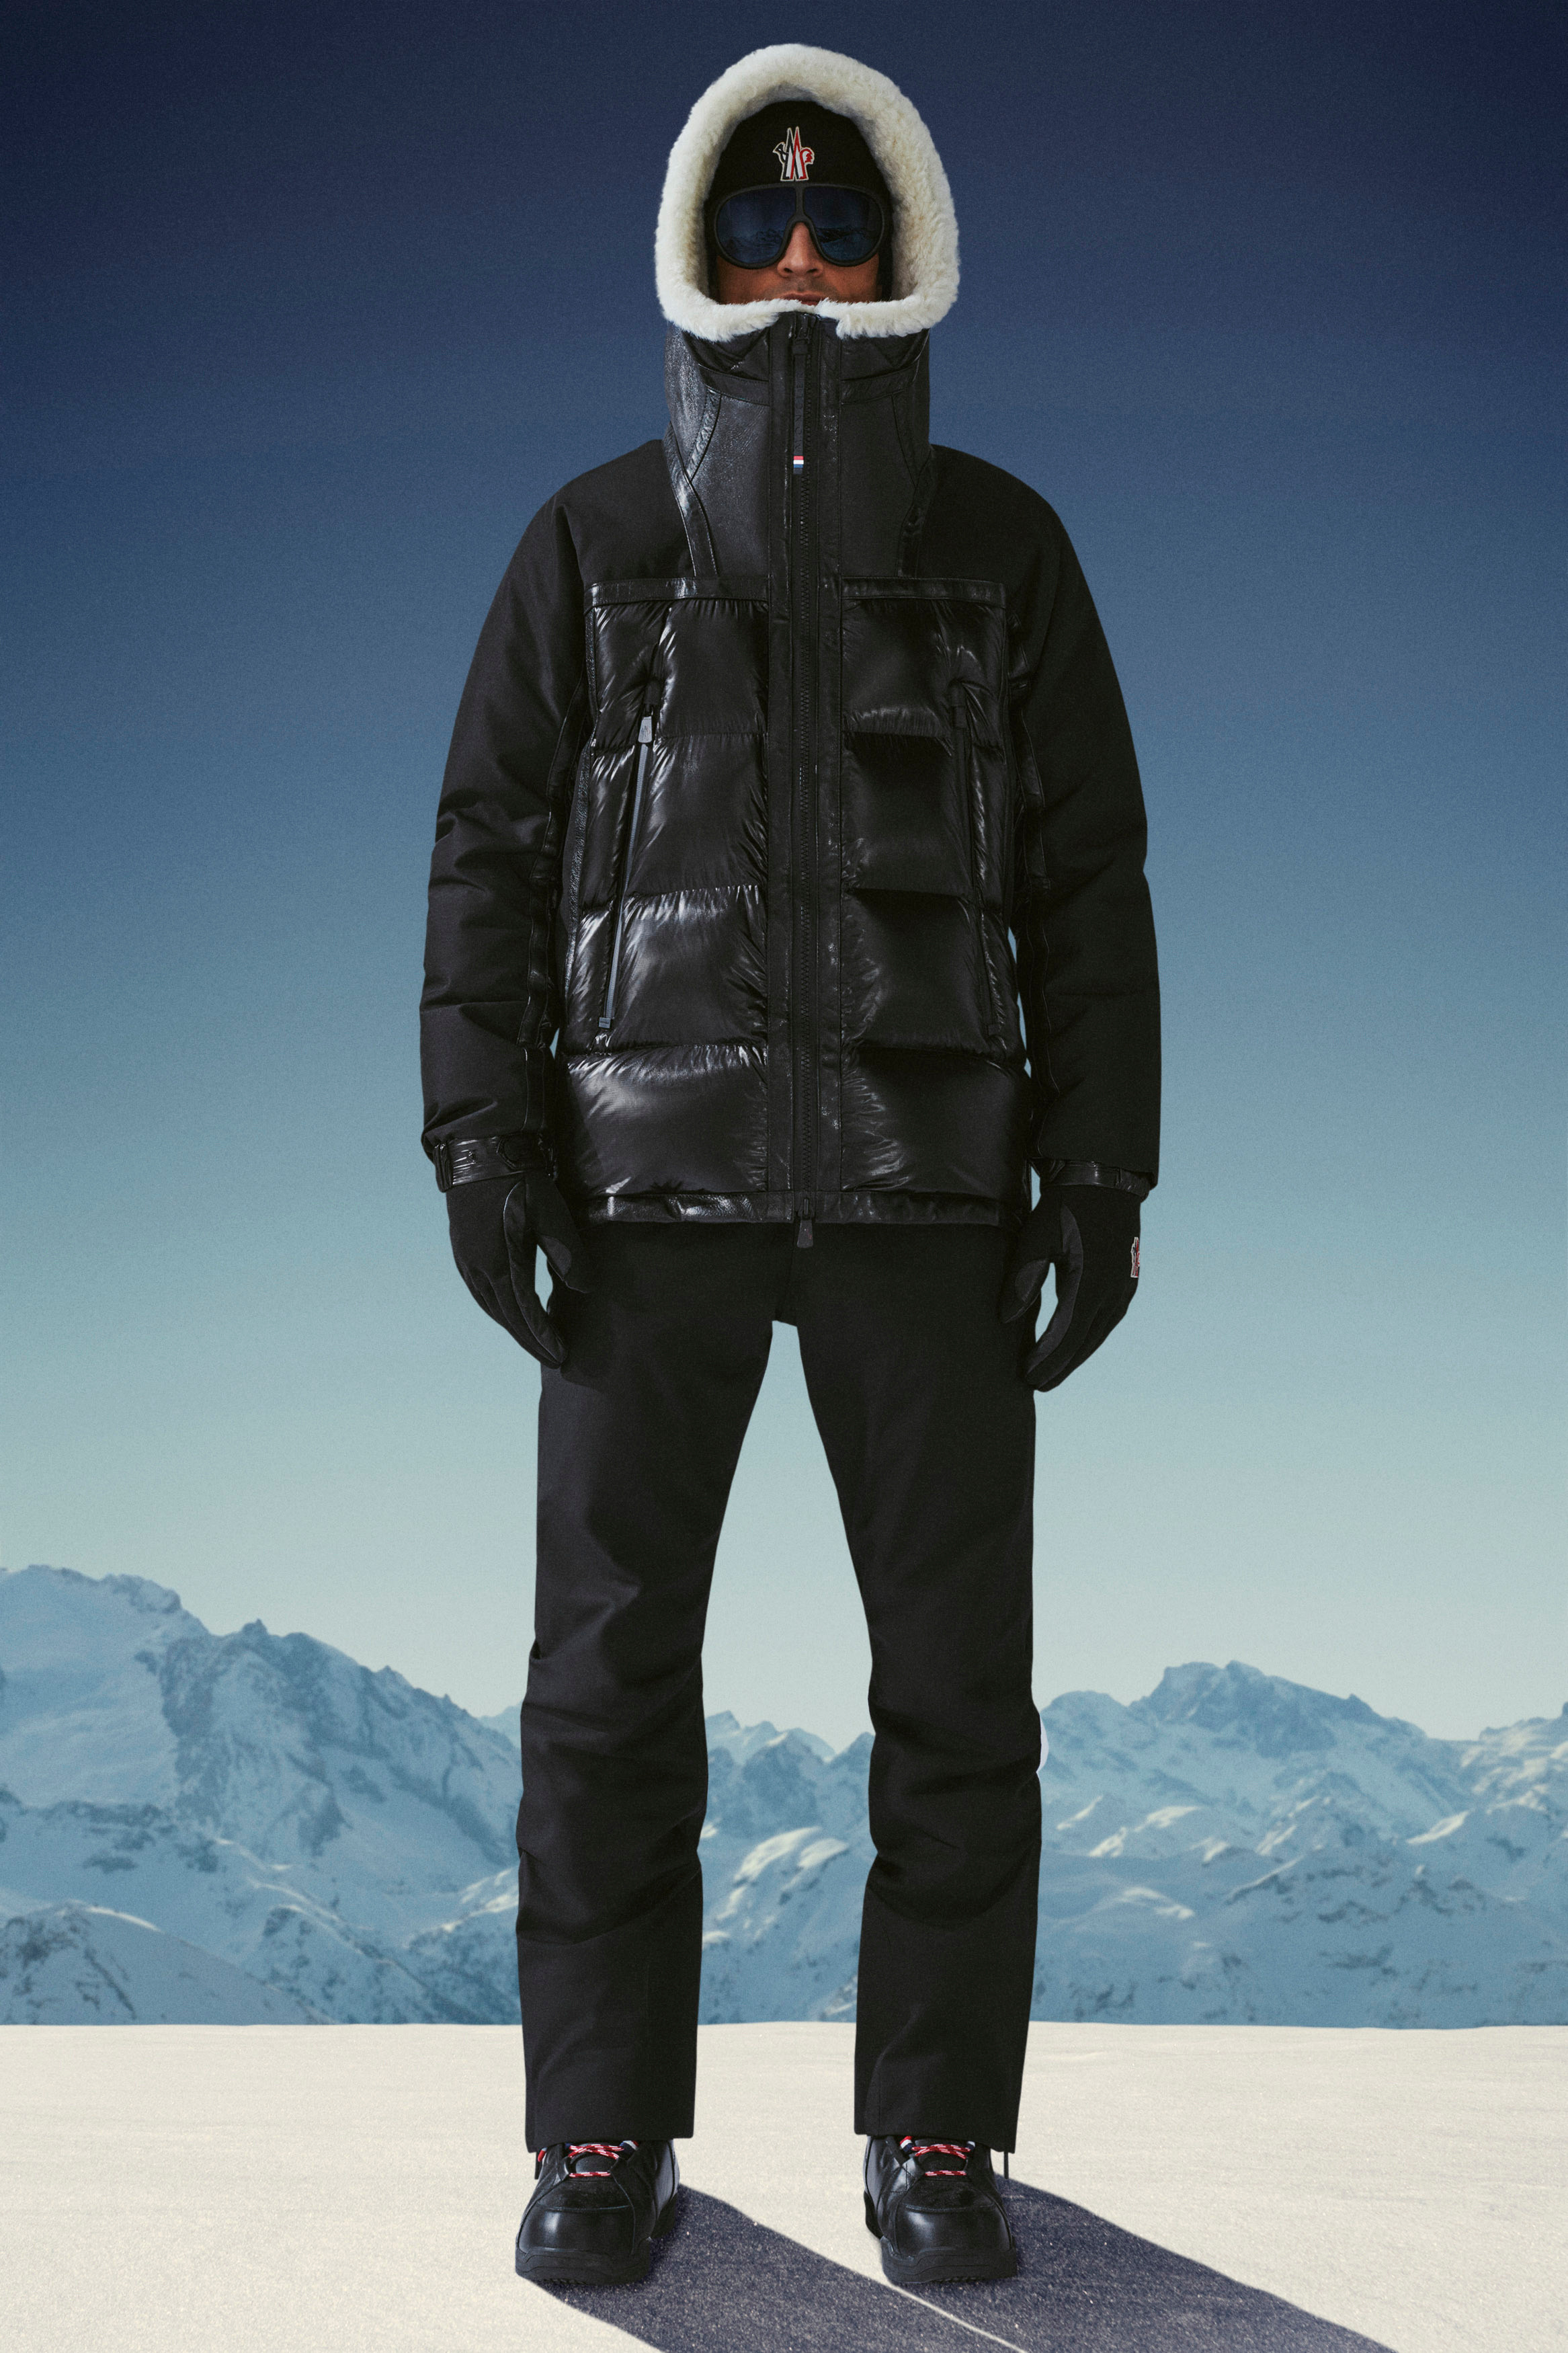 moncler mens jackets saks,OFF 77%,www.concordehotels.com.tr